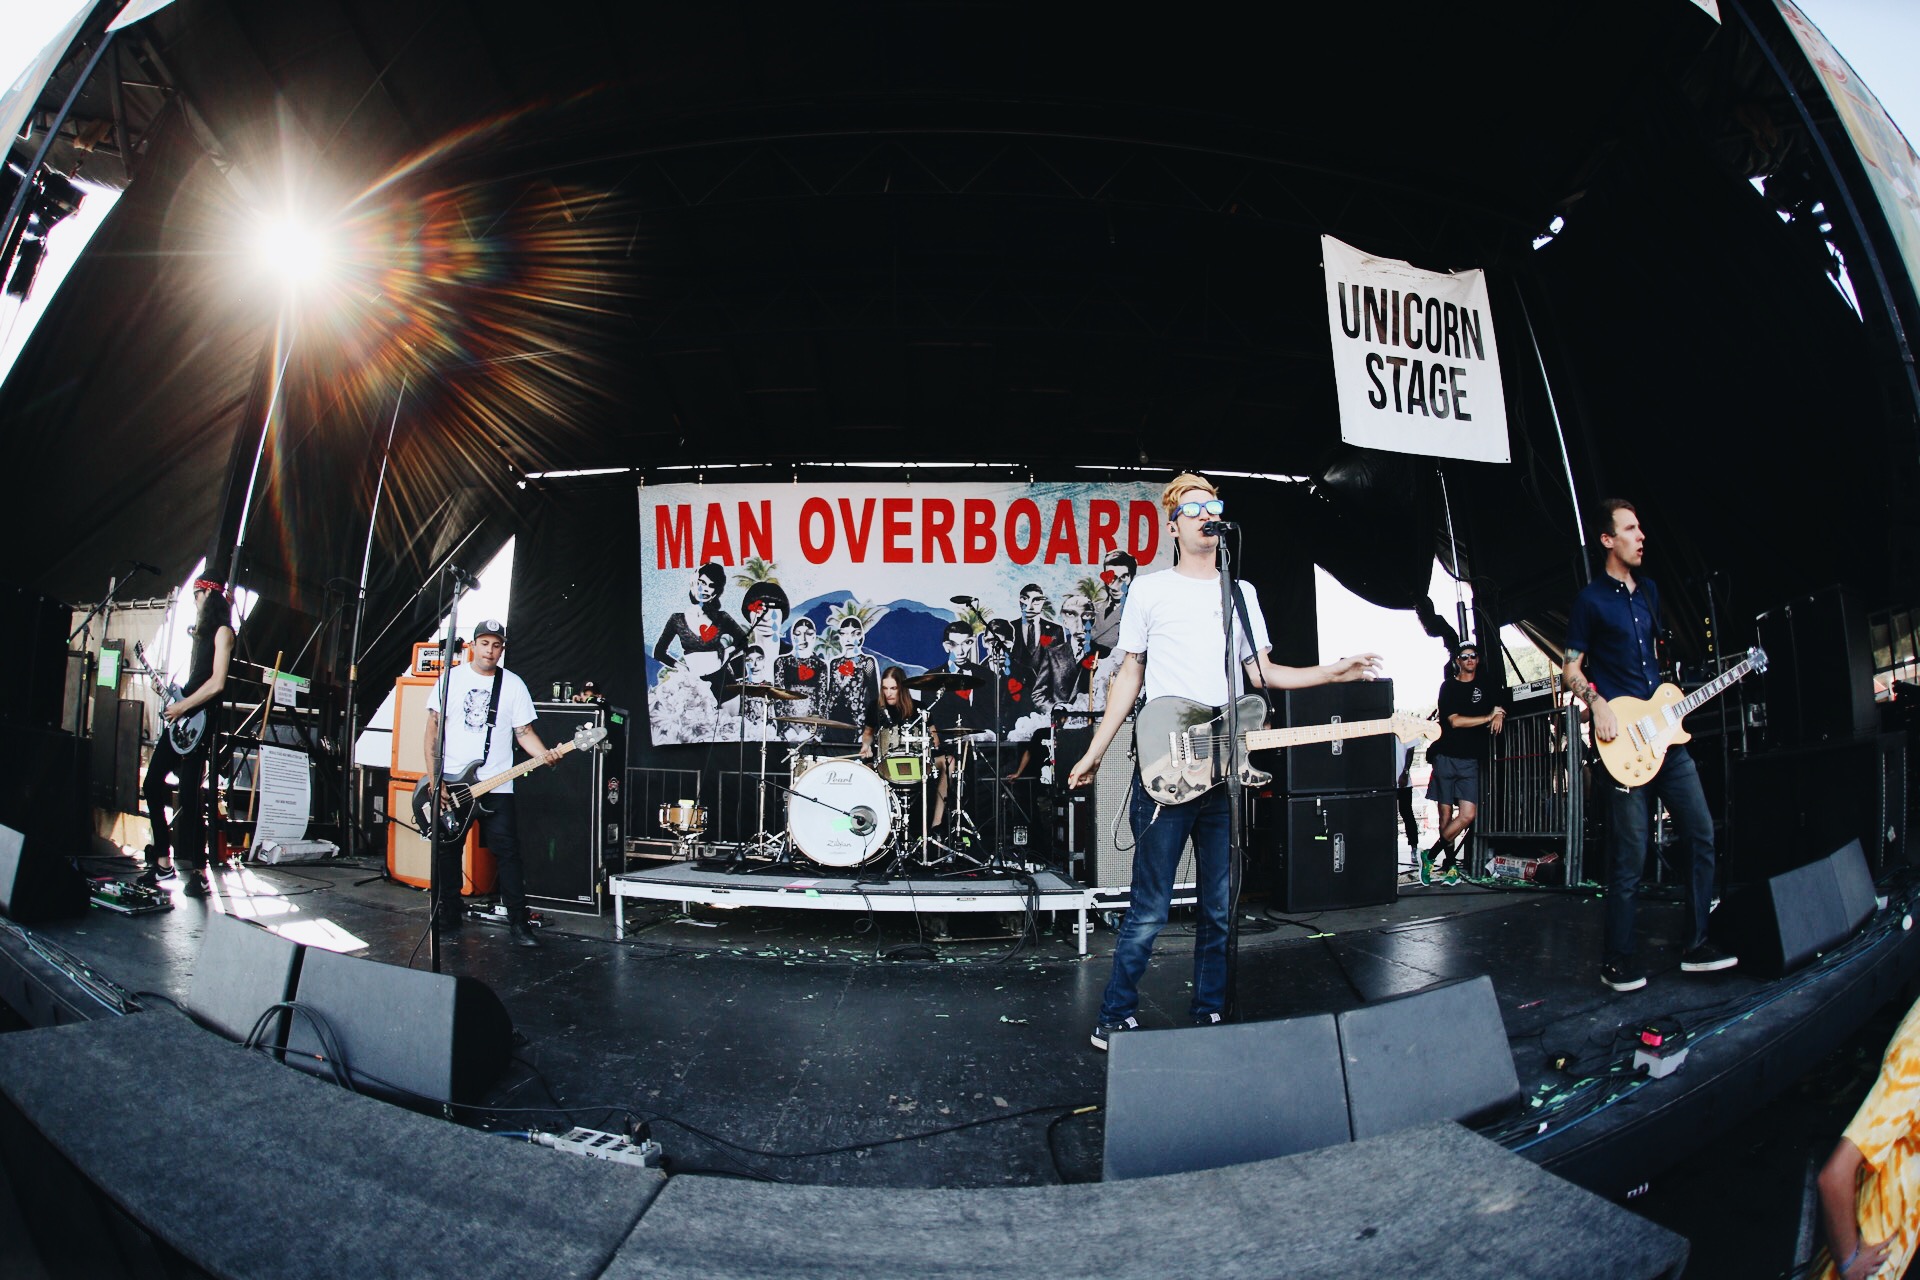 Man Overboard